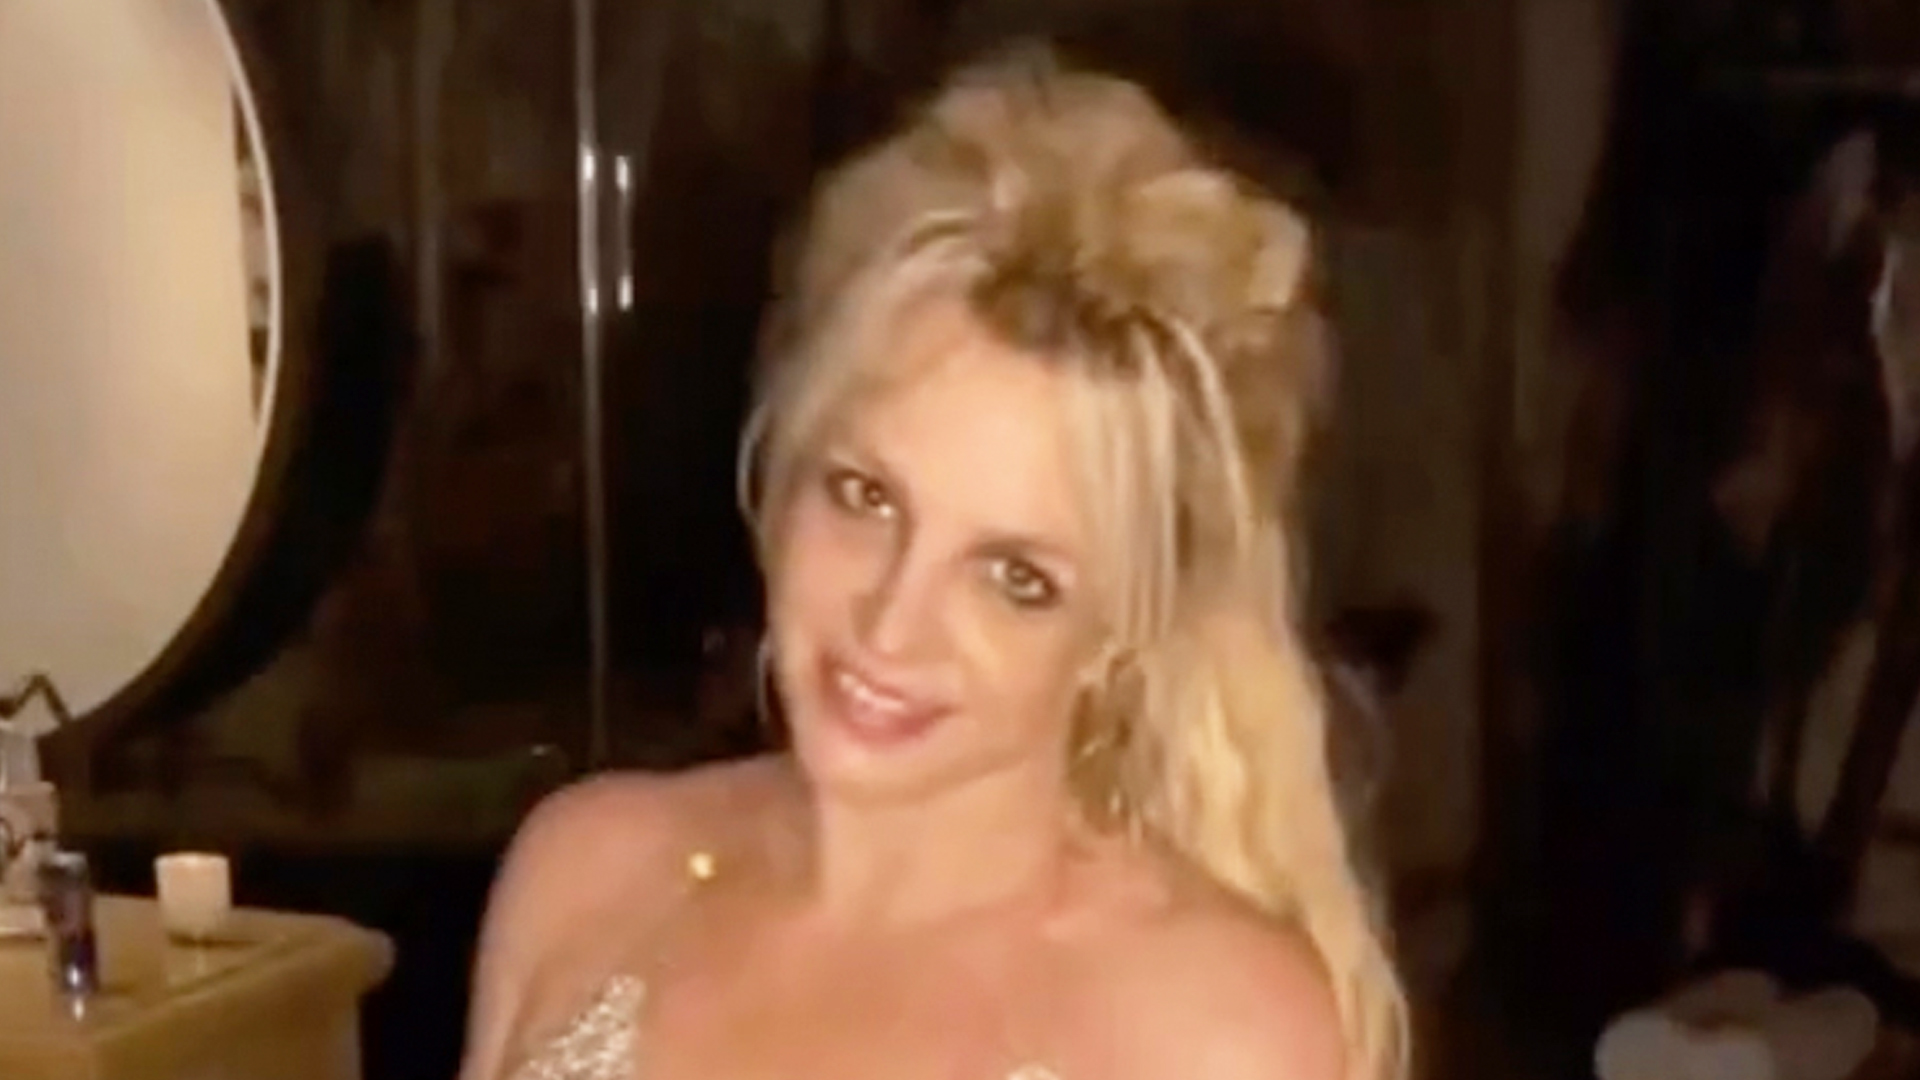 Britney Spears’ side boob pops out of her tight minidress as pop star shows off raunchy dance moves in NSFW new video